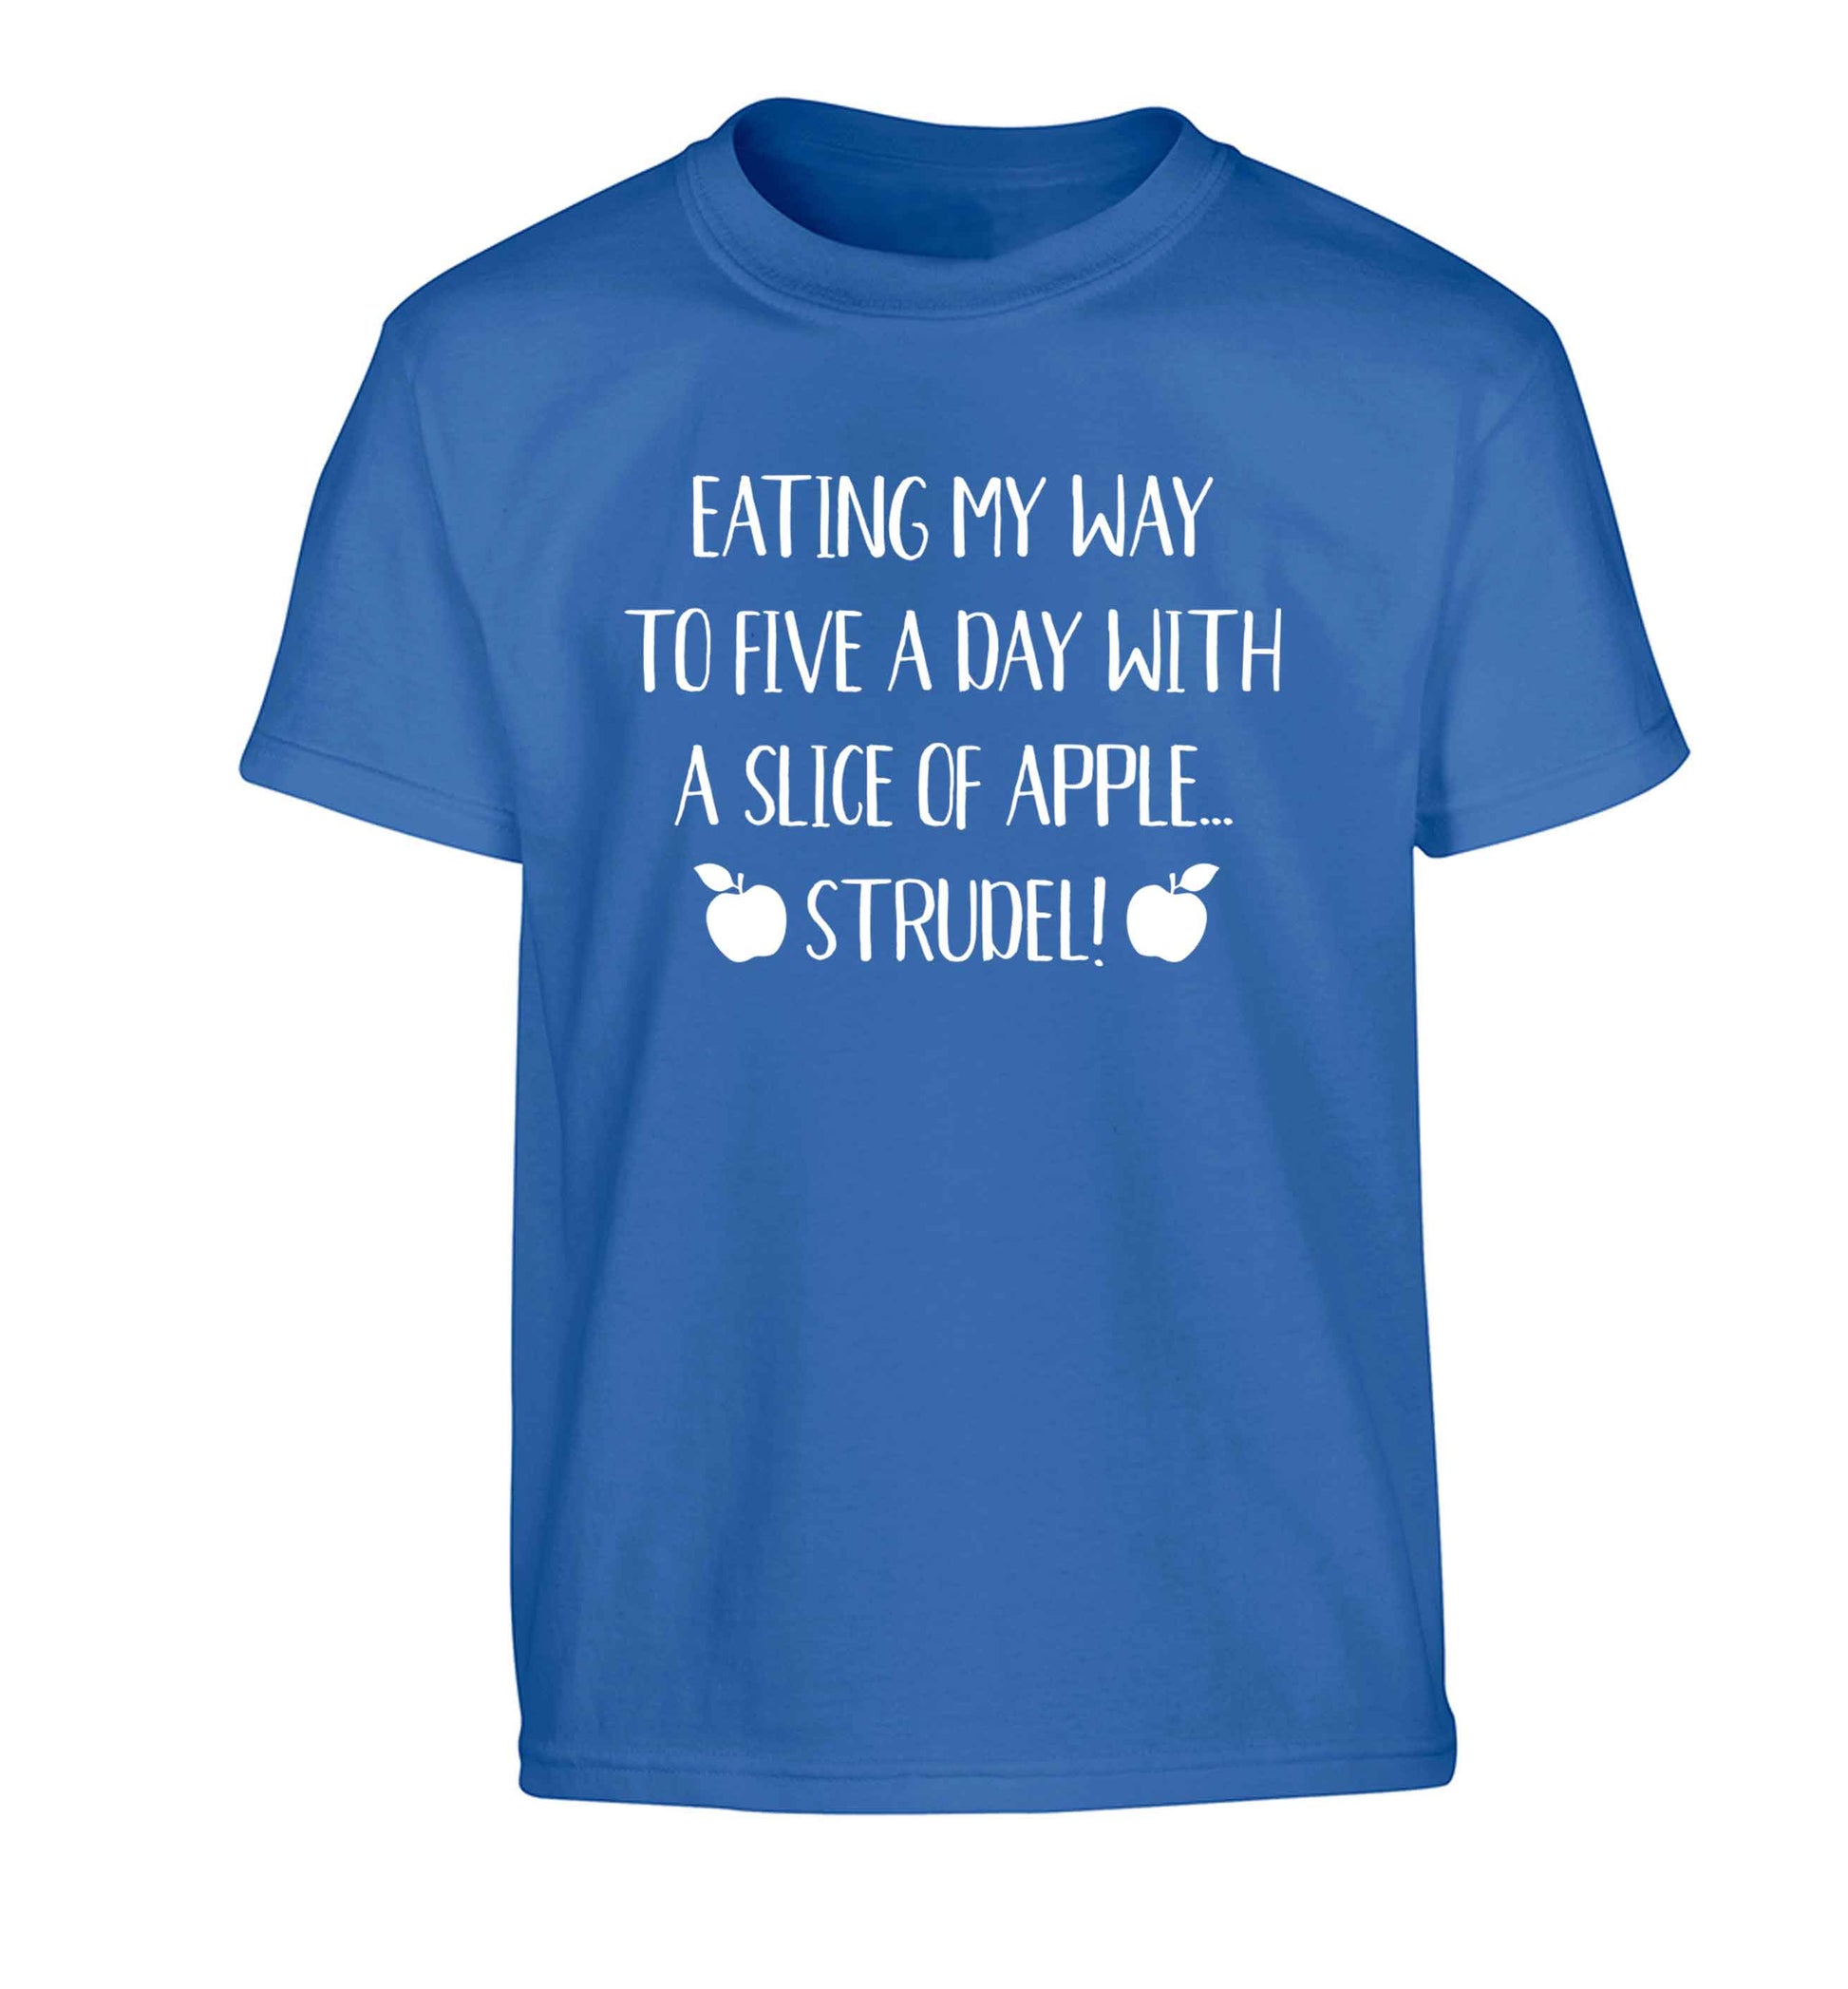 Eating my way to five a day with a slice of apple strudel Children's blue Tshirt 12-13 Years